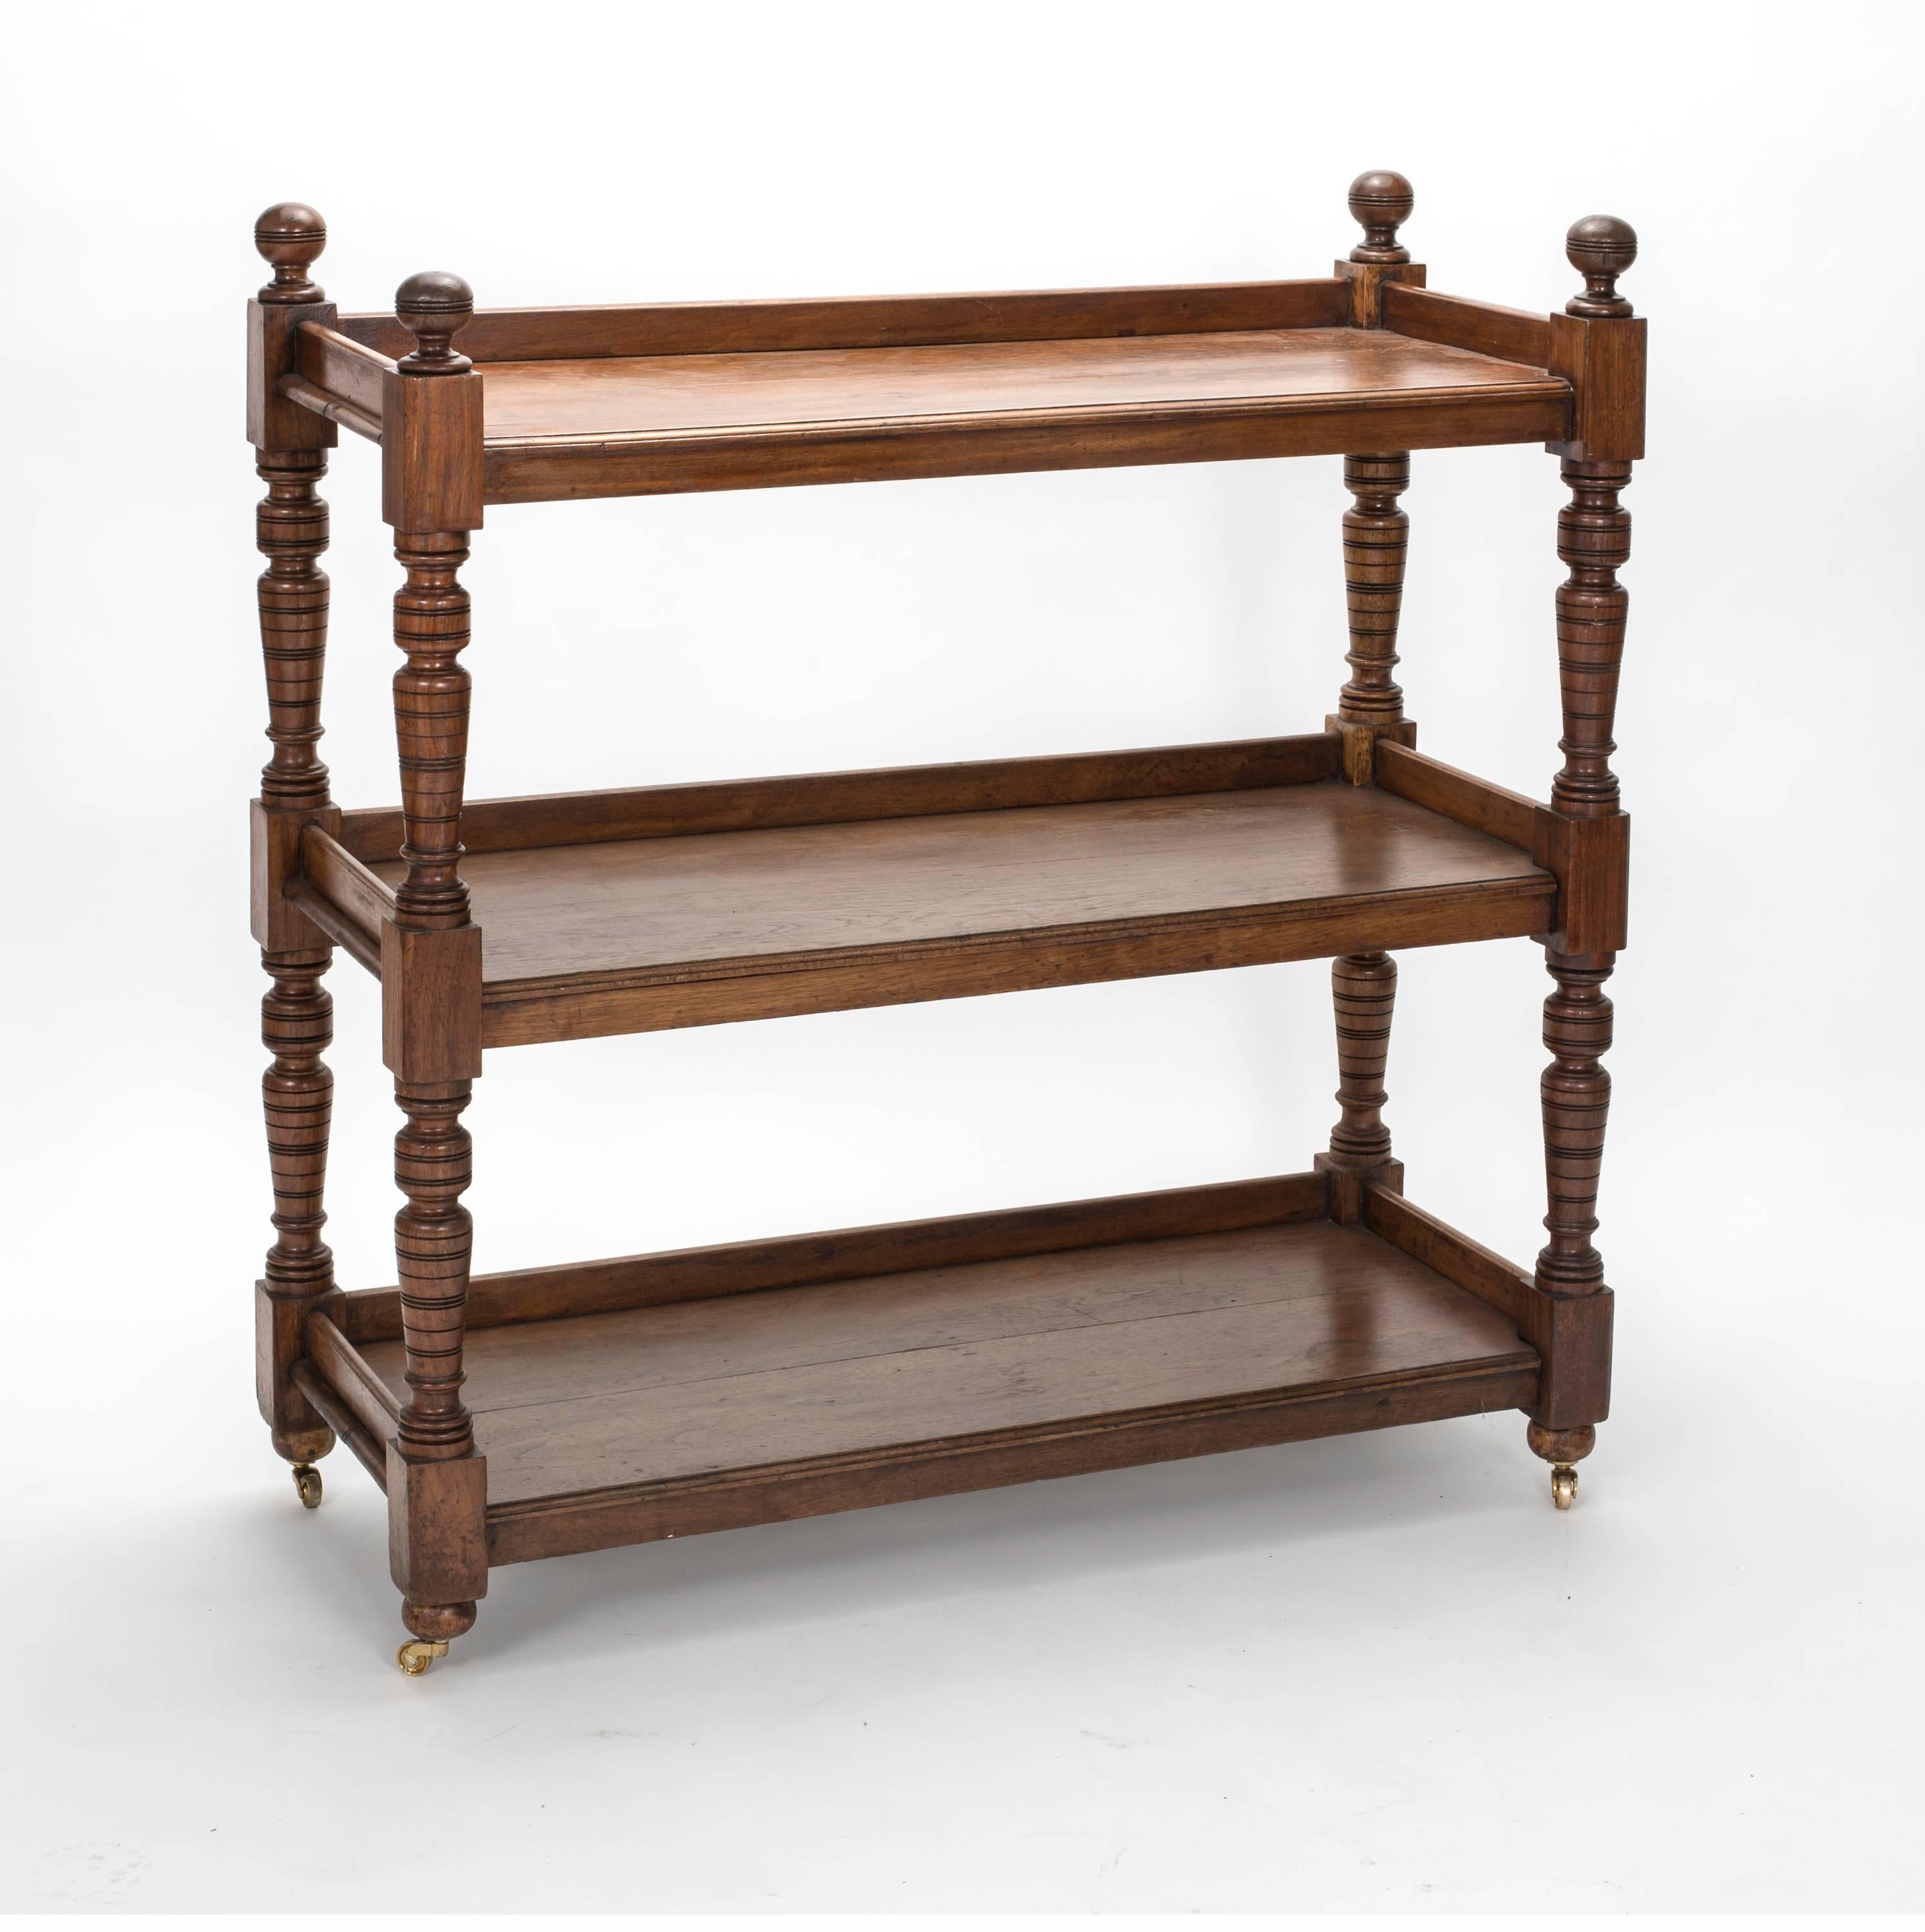 C. 1890s, Beautiful old English walnut wood trolley serving cart. Three-tier shelving for serving and displaying dining accessories. It is on brass castors for easy movement.